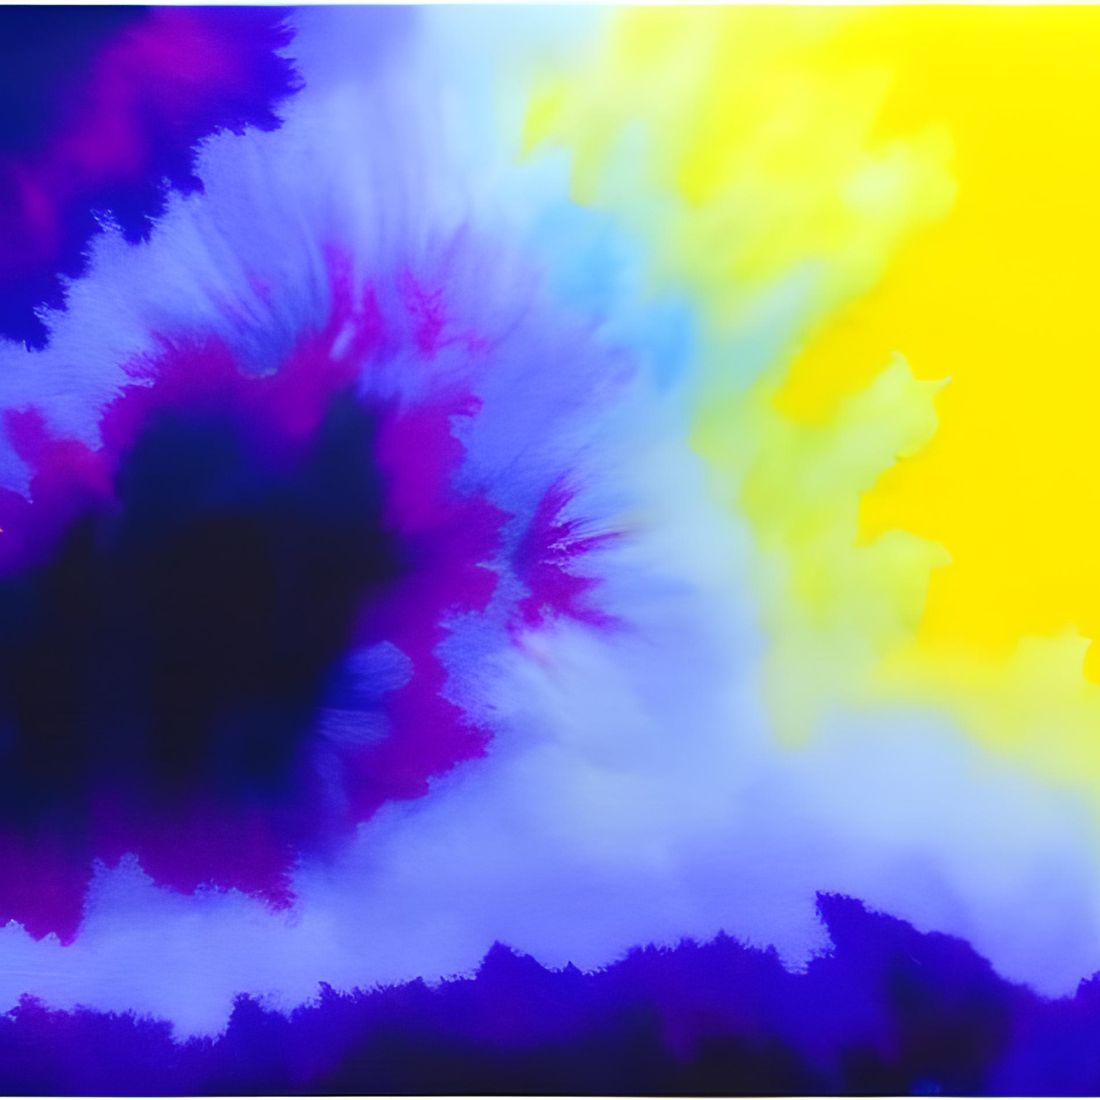 3 tie-dye background images in purple-yellow preview image.